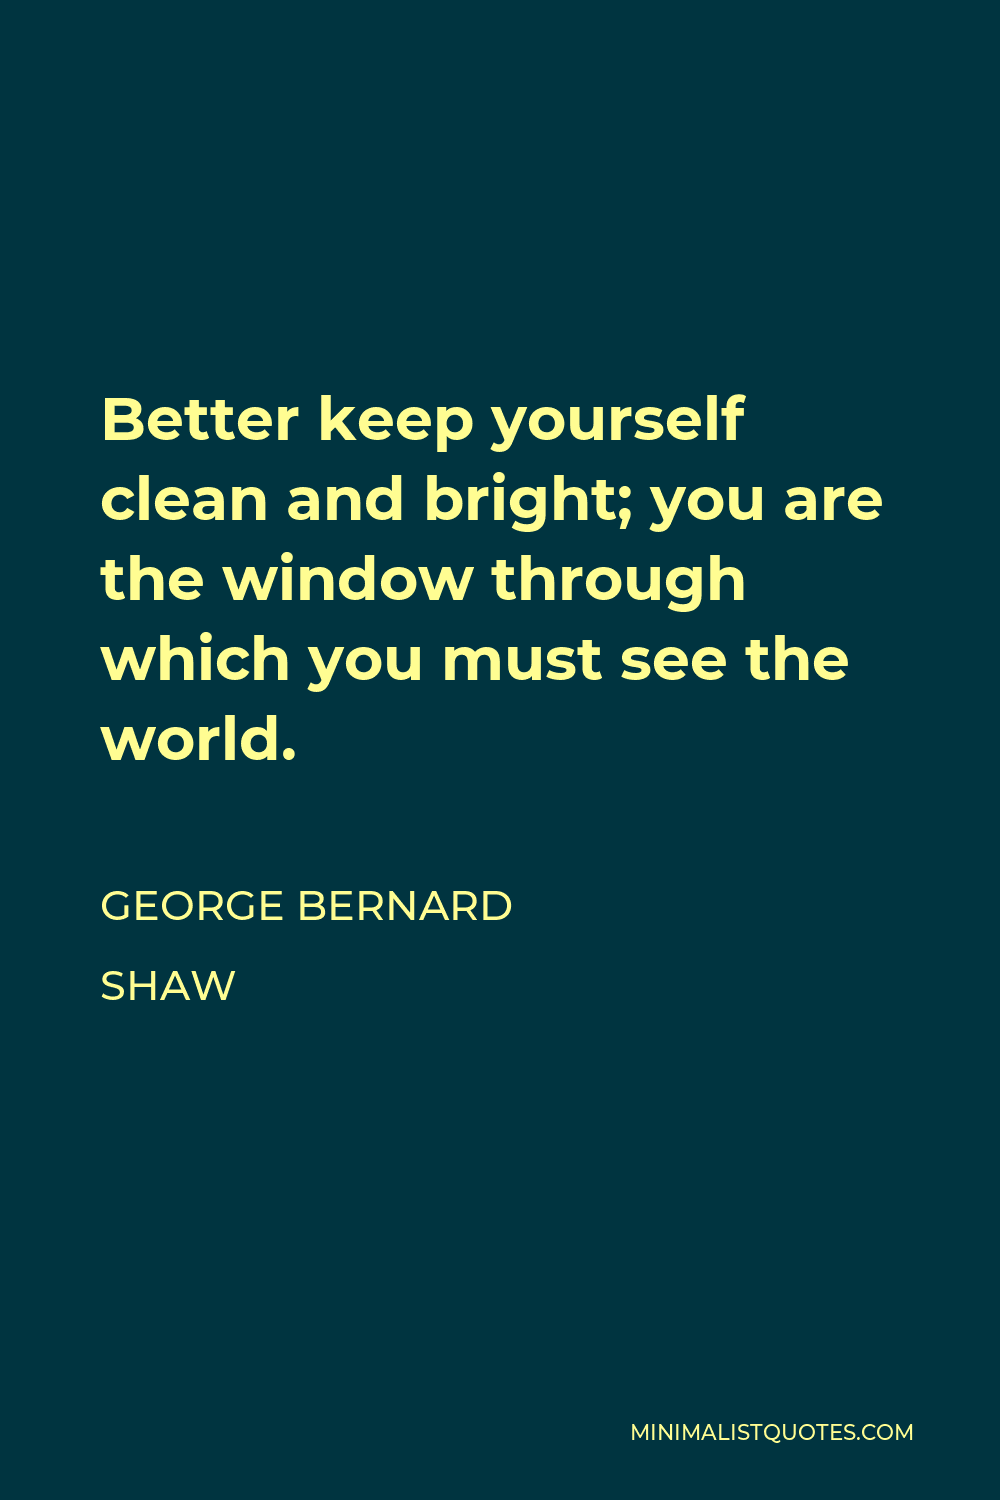 George Bernard Shaw Quote - Better keep yourself clean and bright; you are the window through which you must see the world.